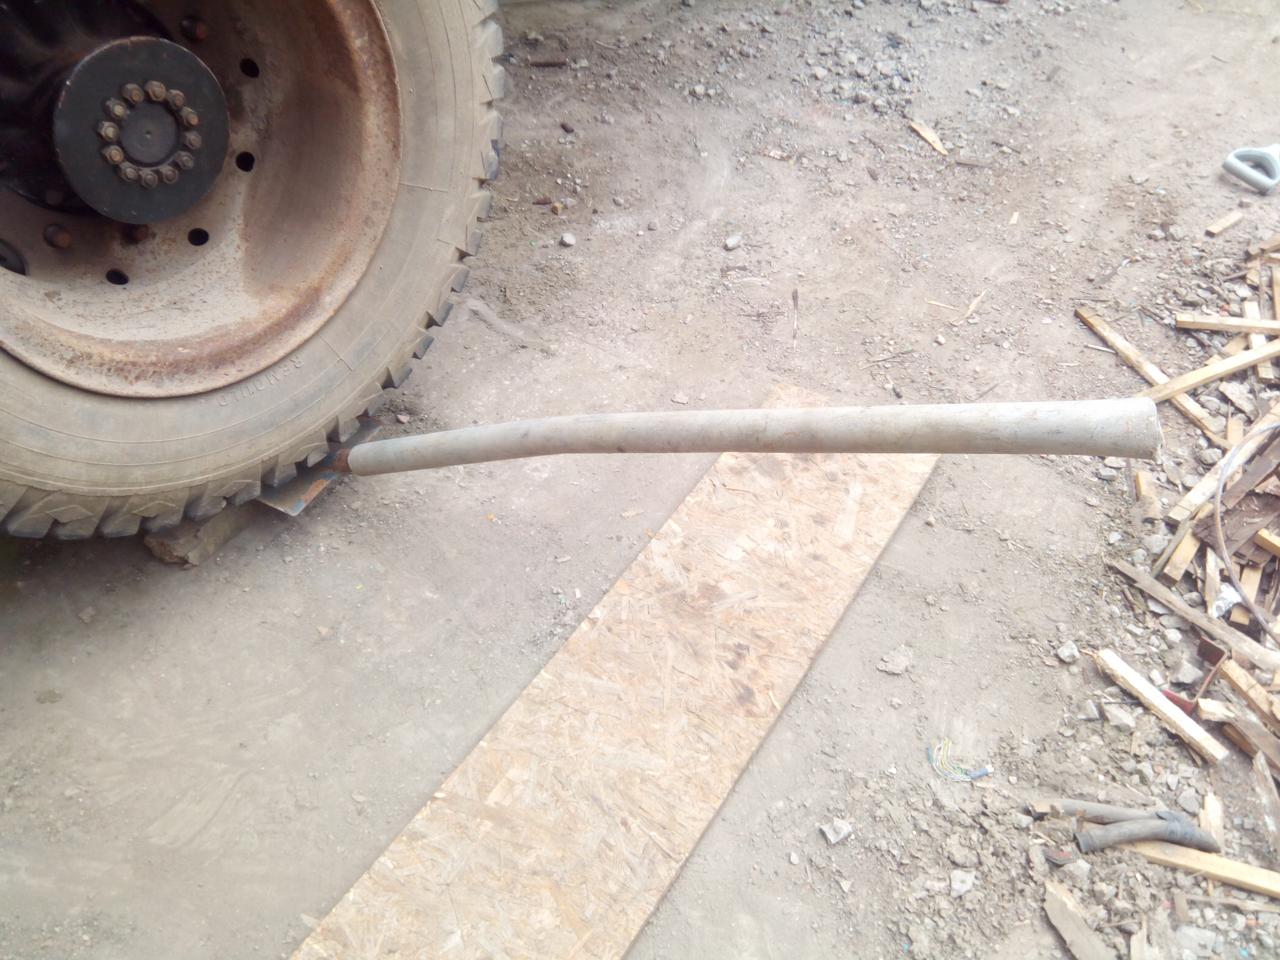 A shovel being used as a lever to pick wheels up and lift them
onto the mounting studs. The handle of the shovel has been replaced by
a length of aluminium tube.